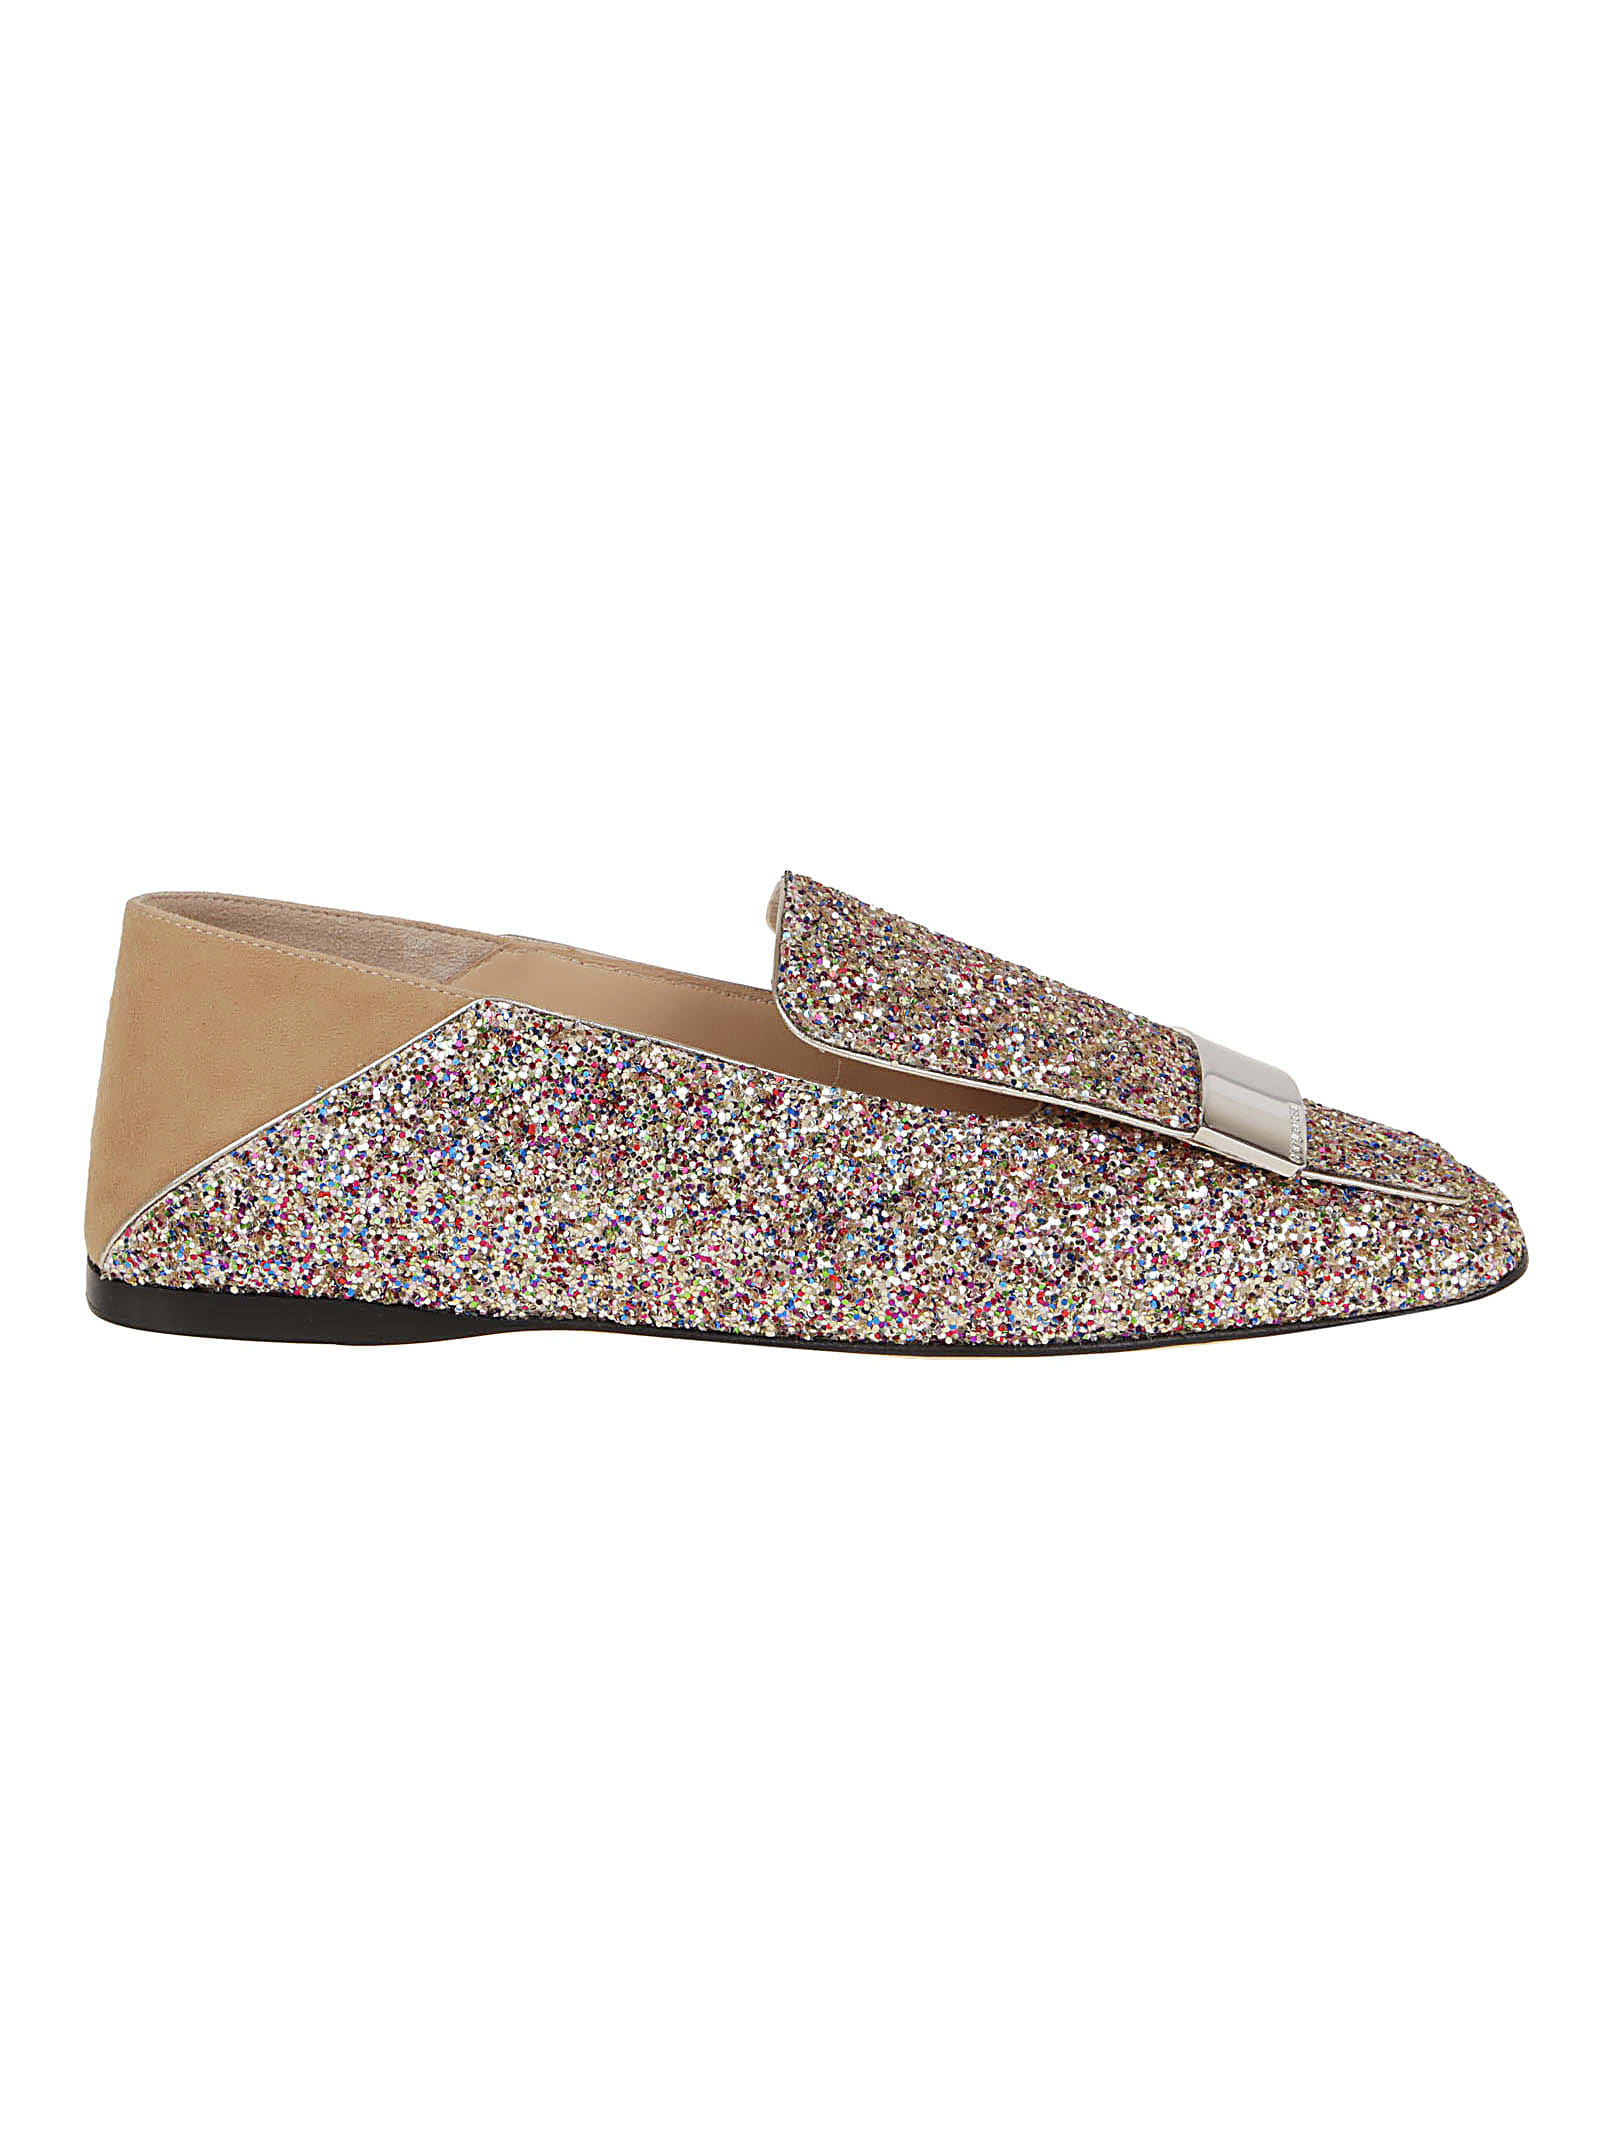 Buy Sergio Rossi Flat Mocassin online, shop Sergio Rossi shoes with free shipping